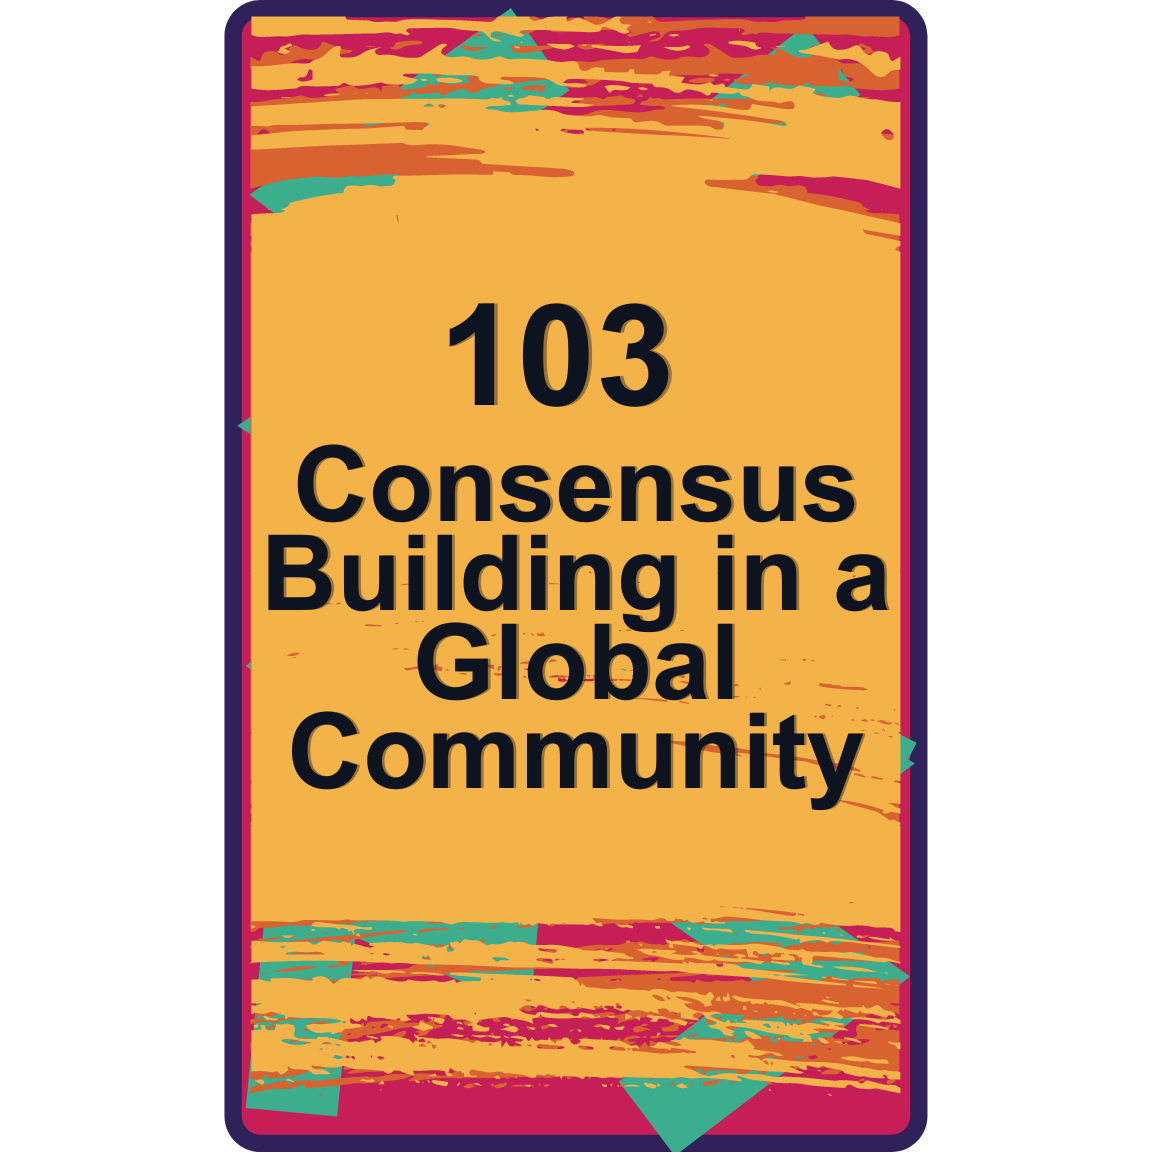 Consensus Building in a Global Community